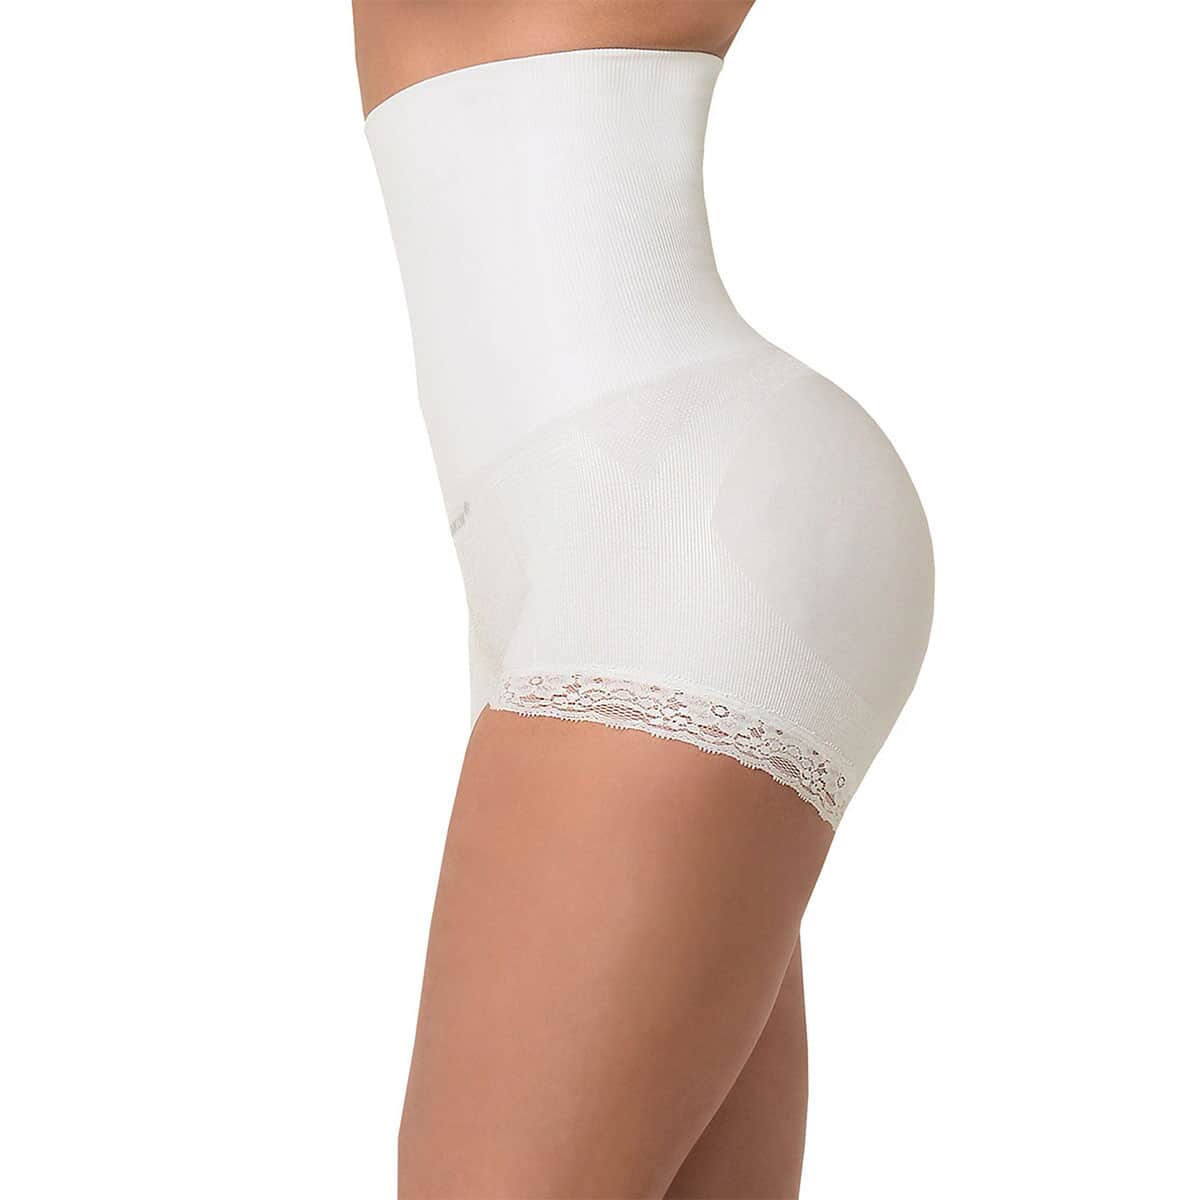 SANKOM Patent Lace Brief Shaper with Pearl Fibers - XS | White image number 0